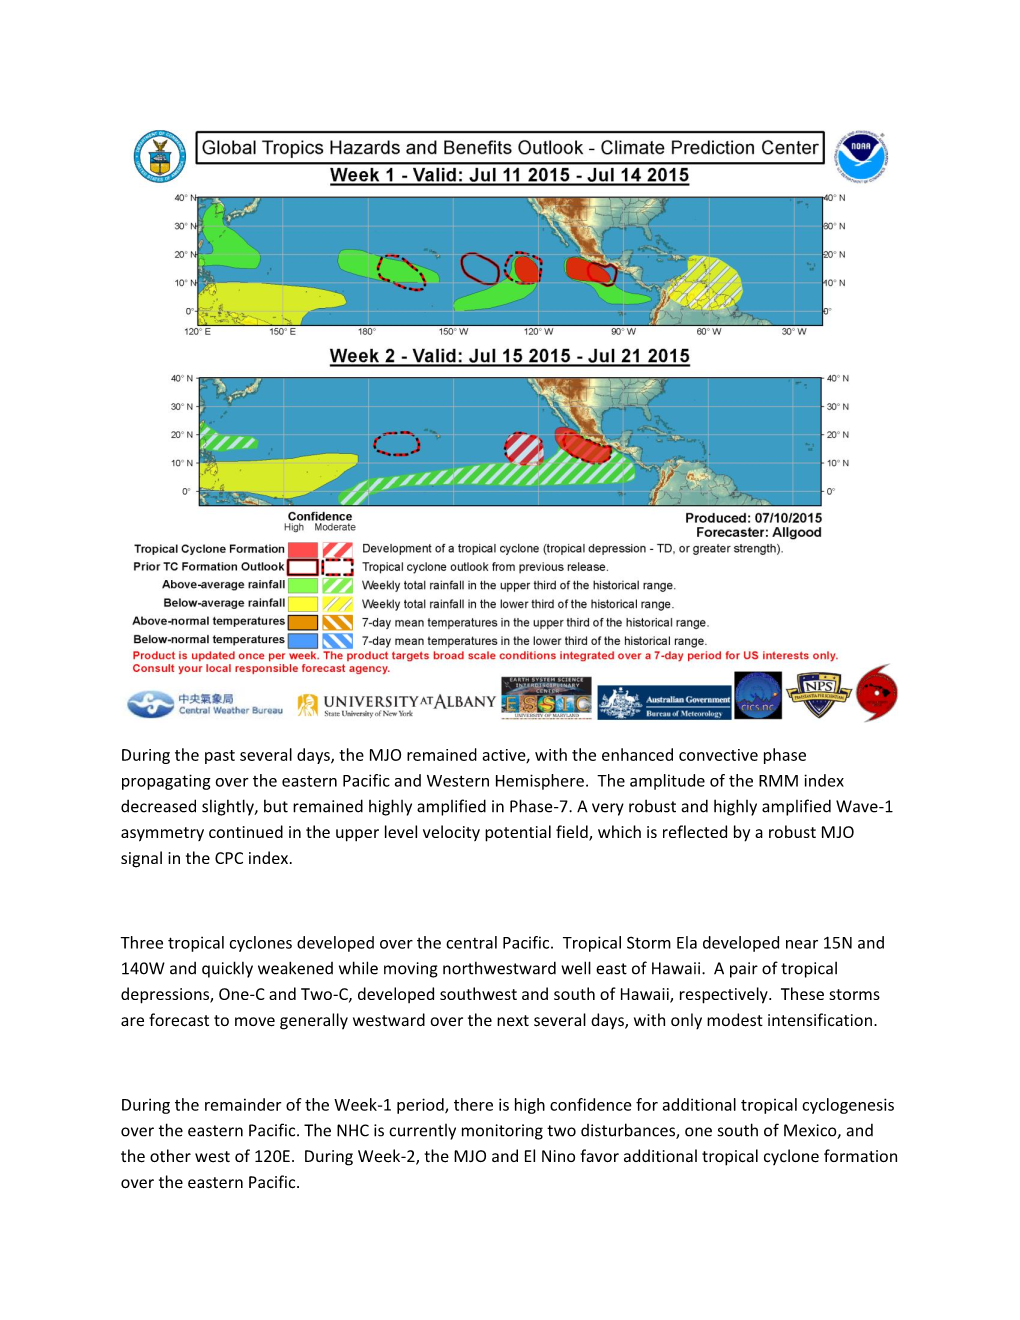 During the Past Several Days, the MJO Remained Active, with the Enhanced Convective Phase Propagating Over the Eastern Pacific and Western Hemisphere